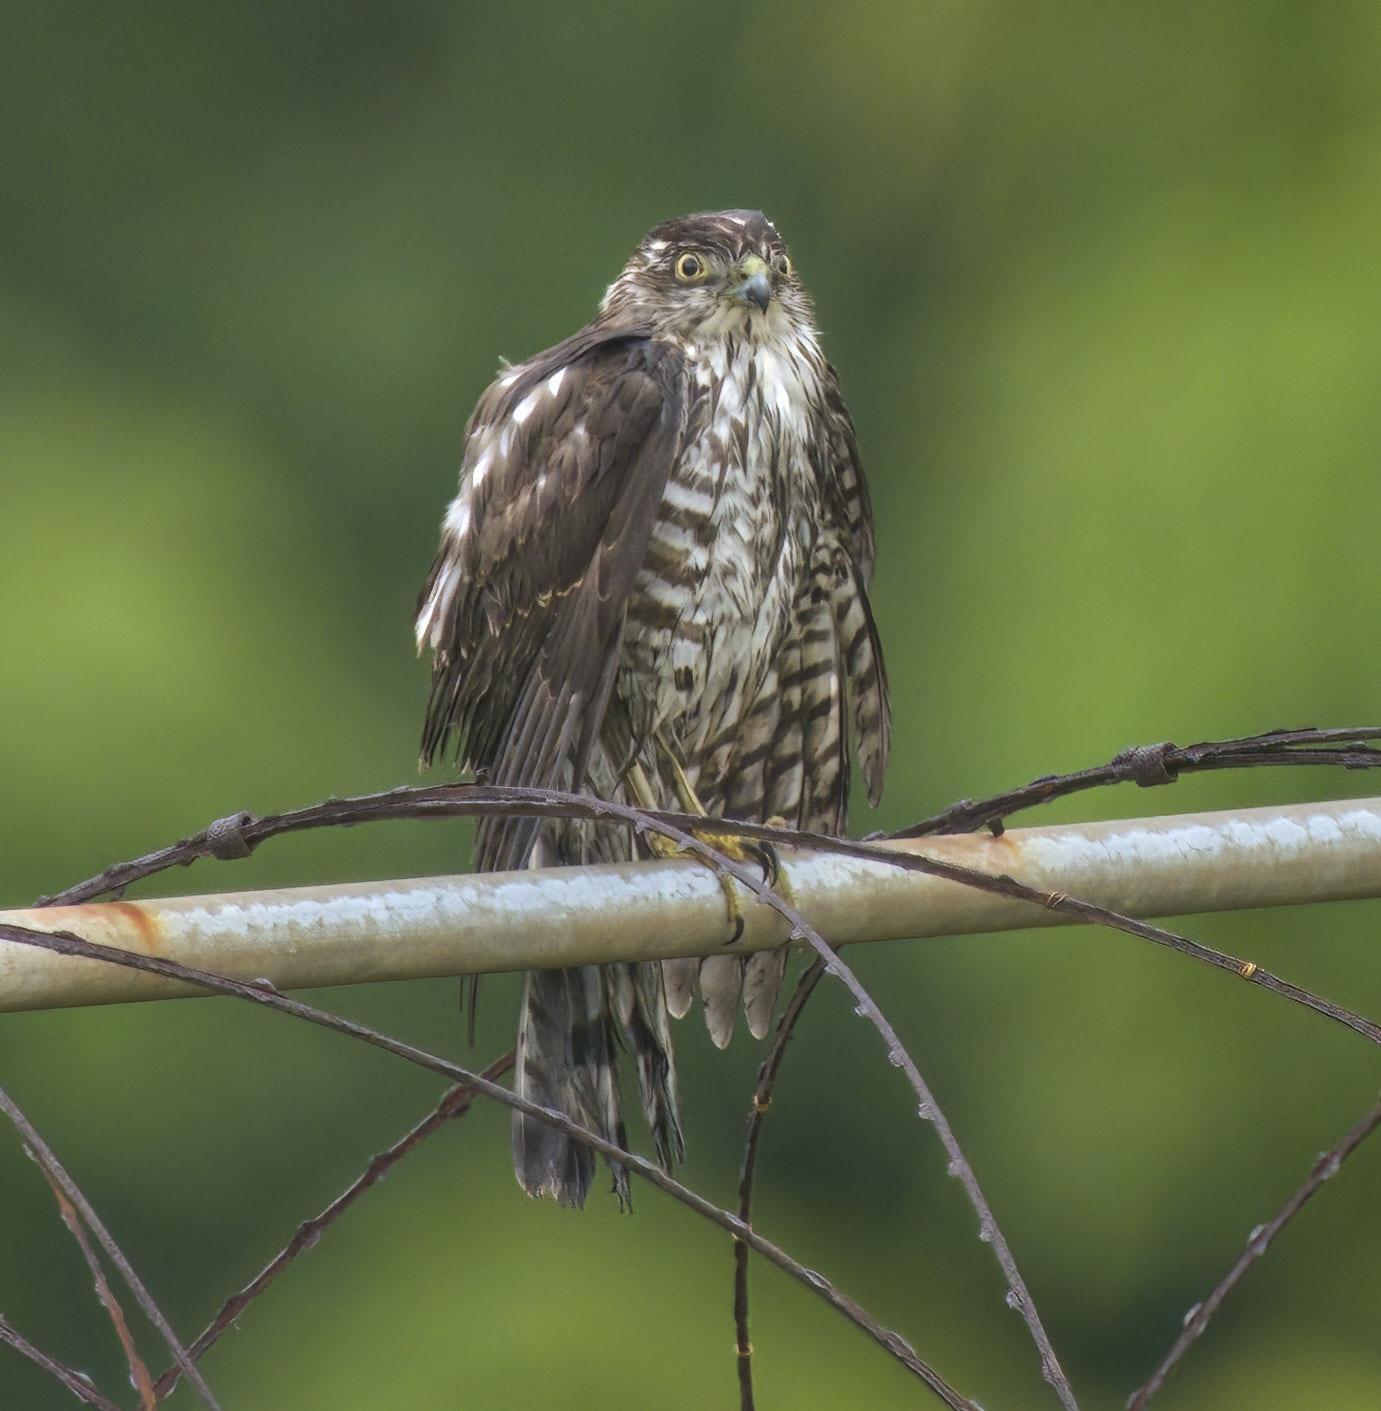 Japanese Sparrowhawk Photo by Steven Cheong